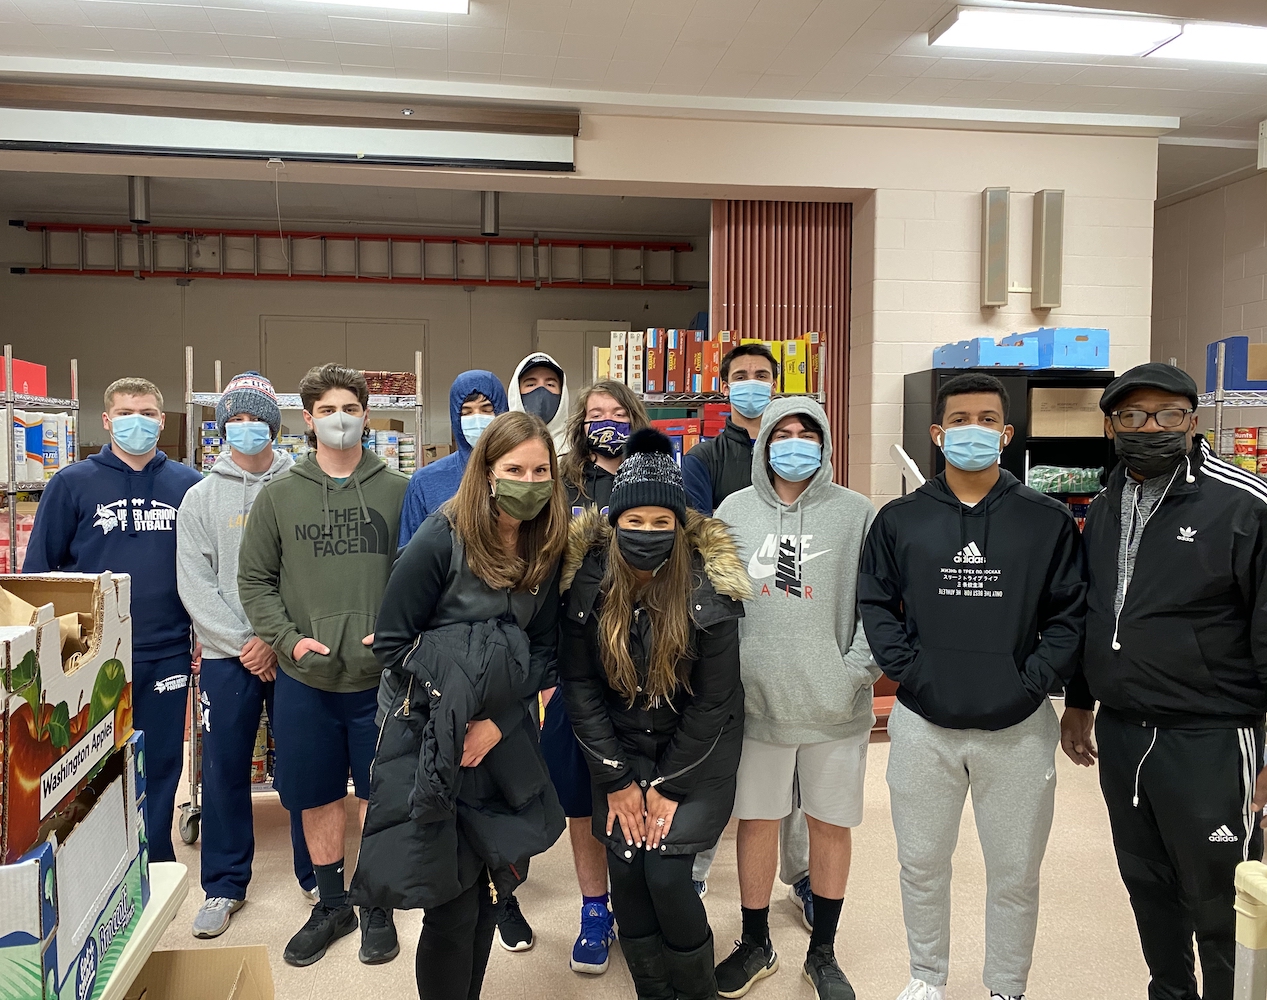 image of group of people wearing fast masks posing indoors